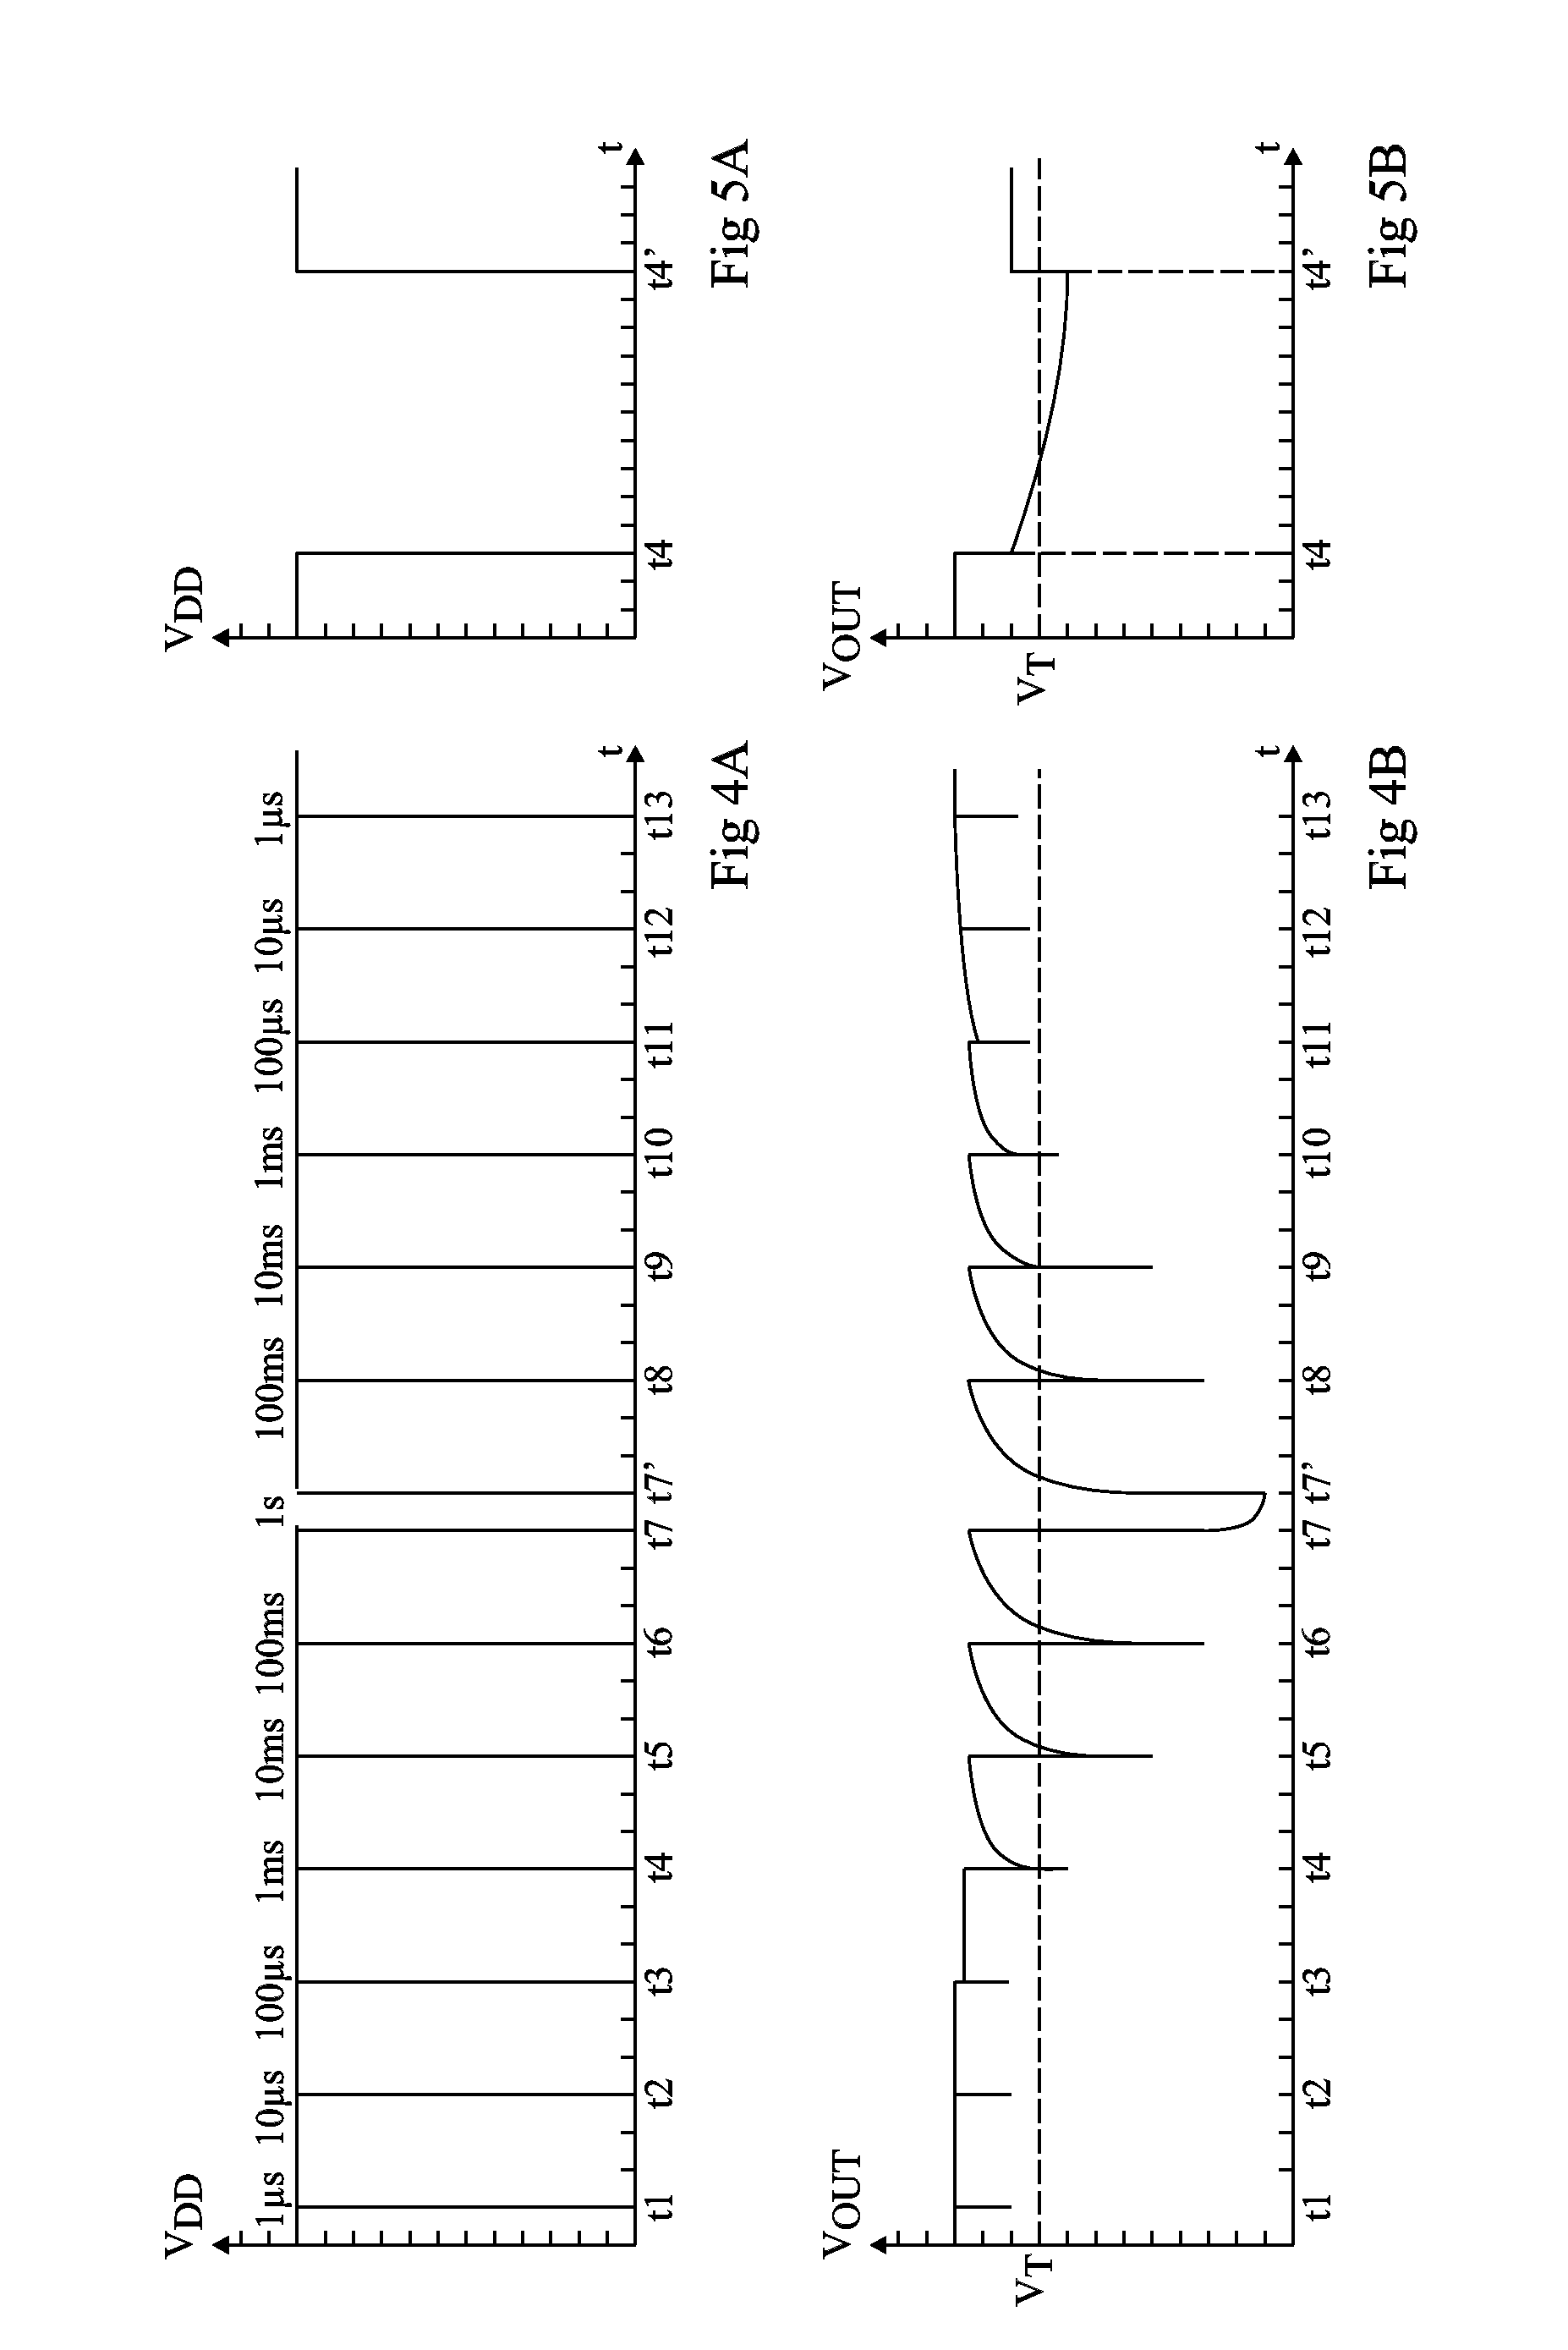 Circuit and method for detecting a fault attack